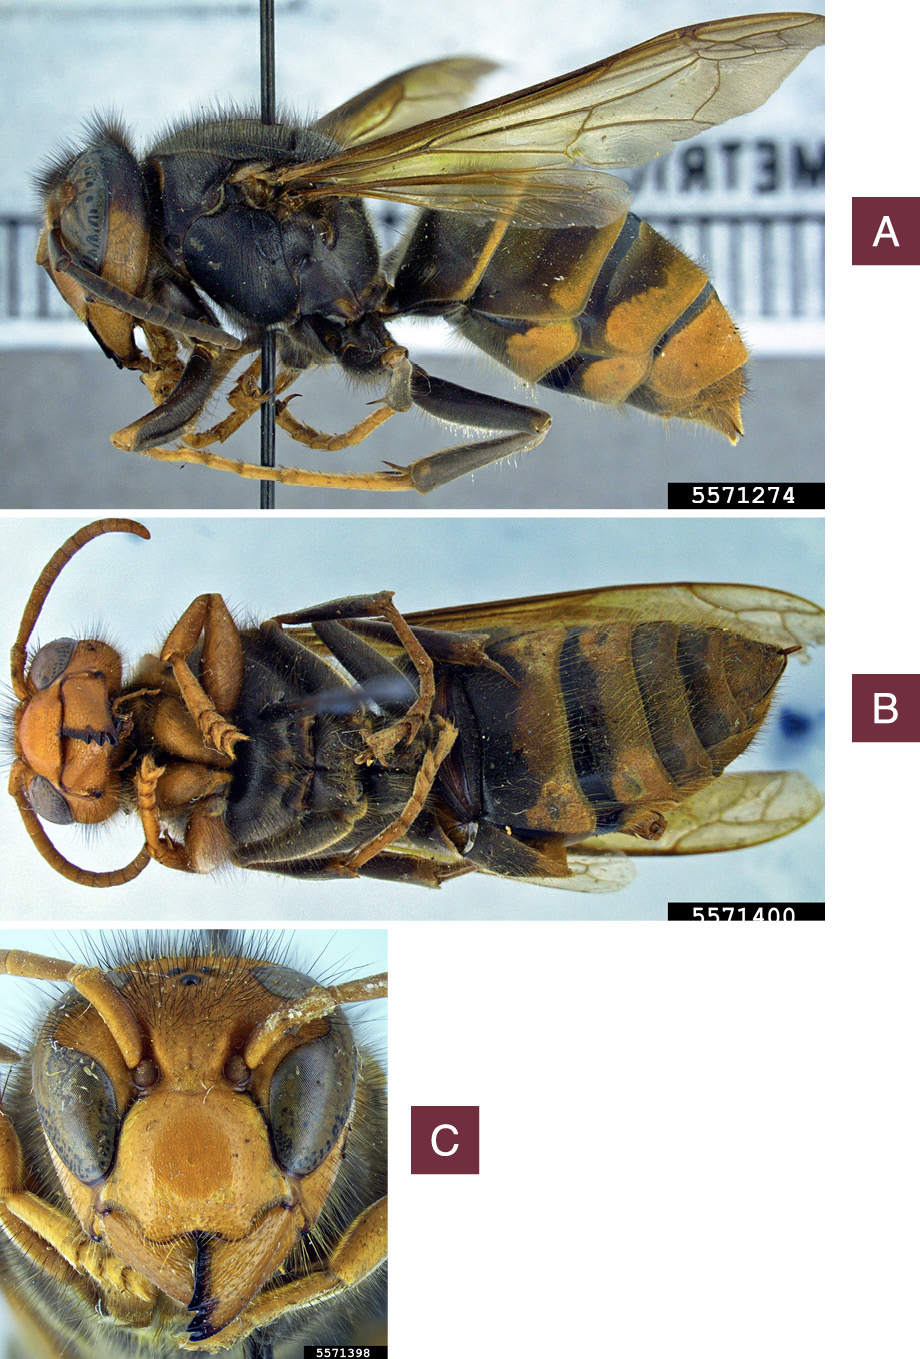 Close-up, side profile of a pinned yellow-legged hornet specimen. The underside of a yellow-legged hornet specimen. Close-up of a yellow-legged hornet’s face and antennae.